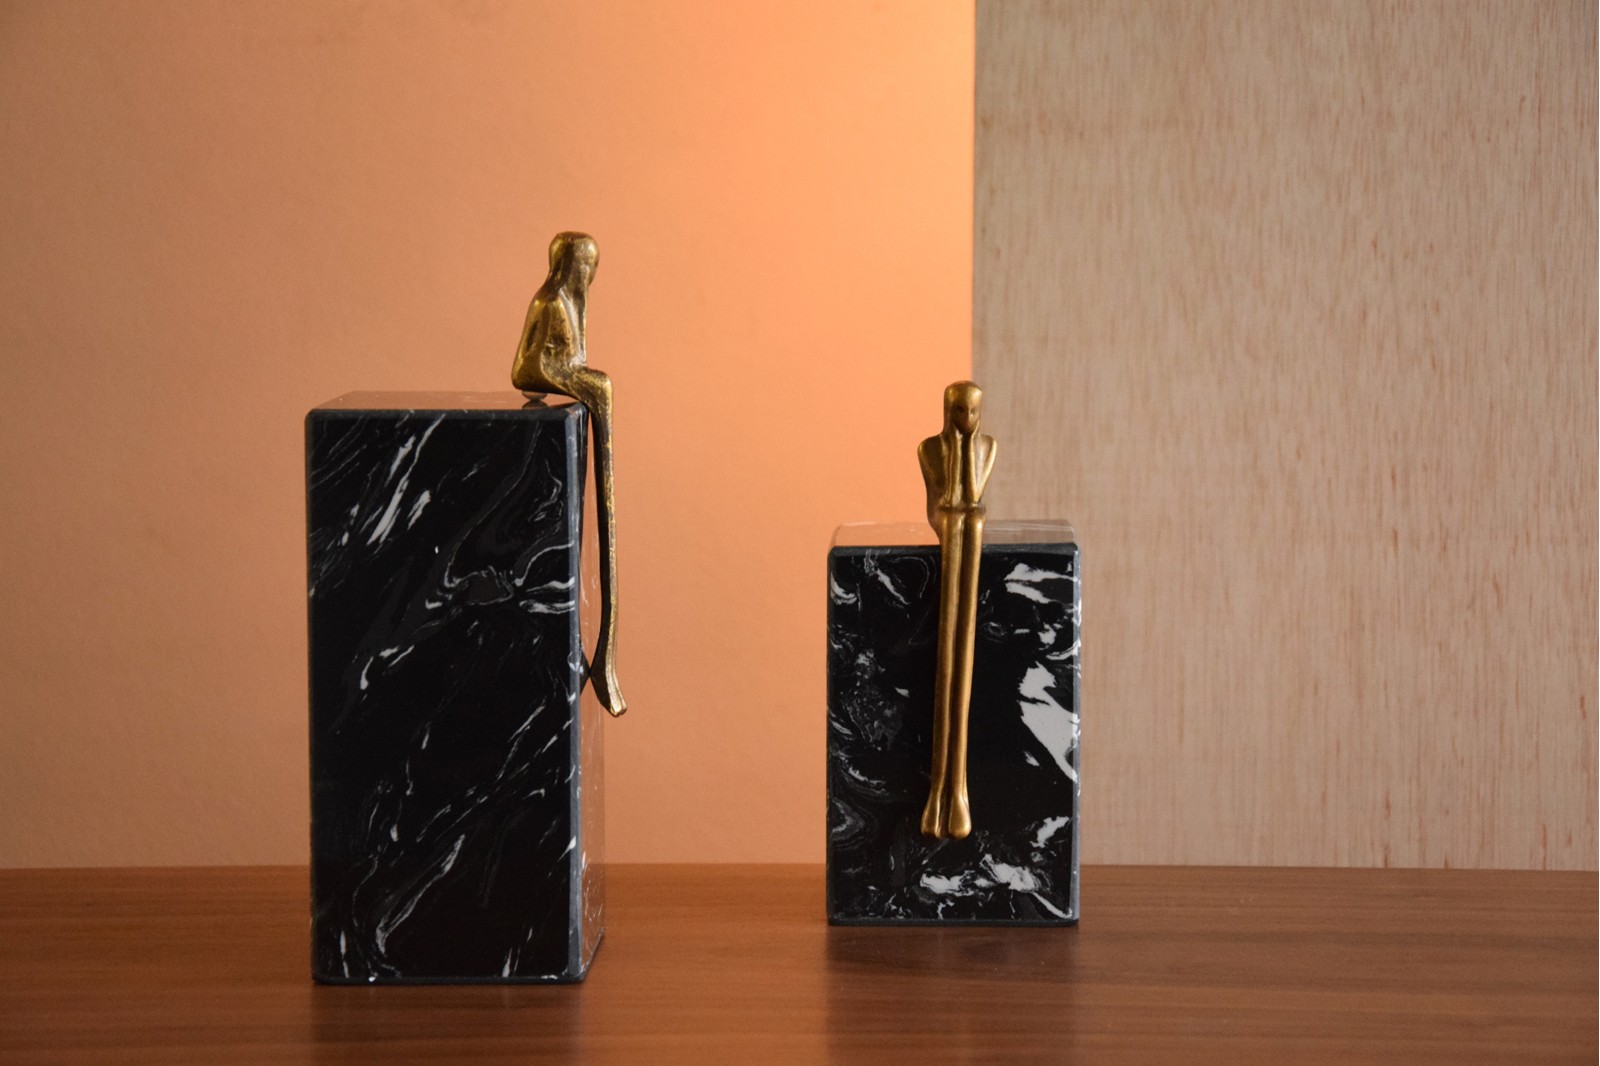 WAITING COLLECTION. MARBLE AND METAL